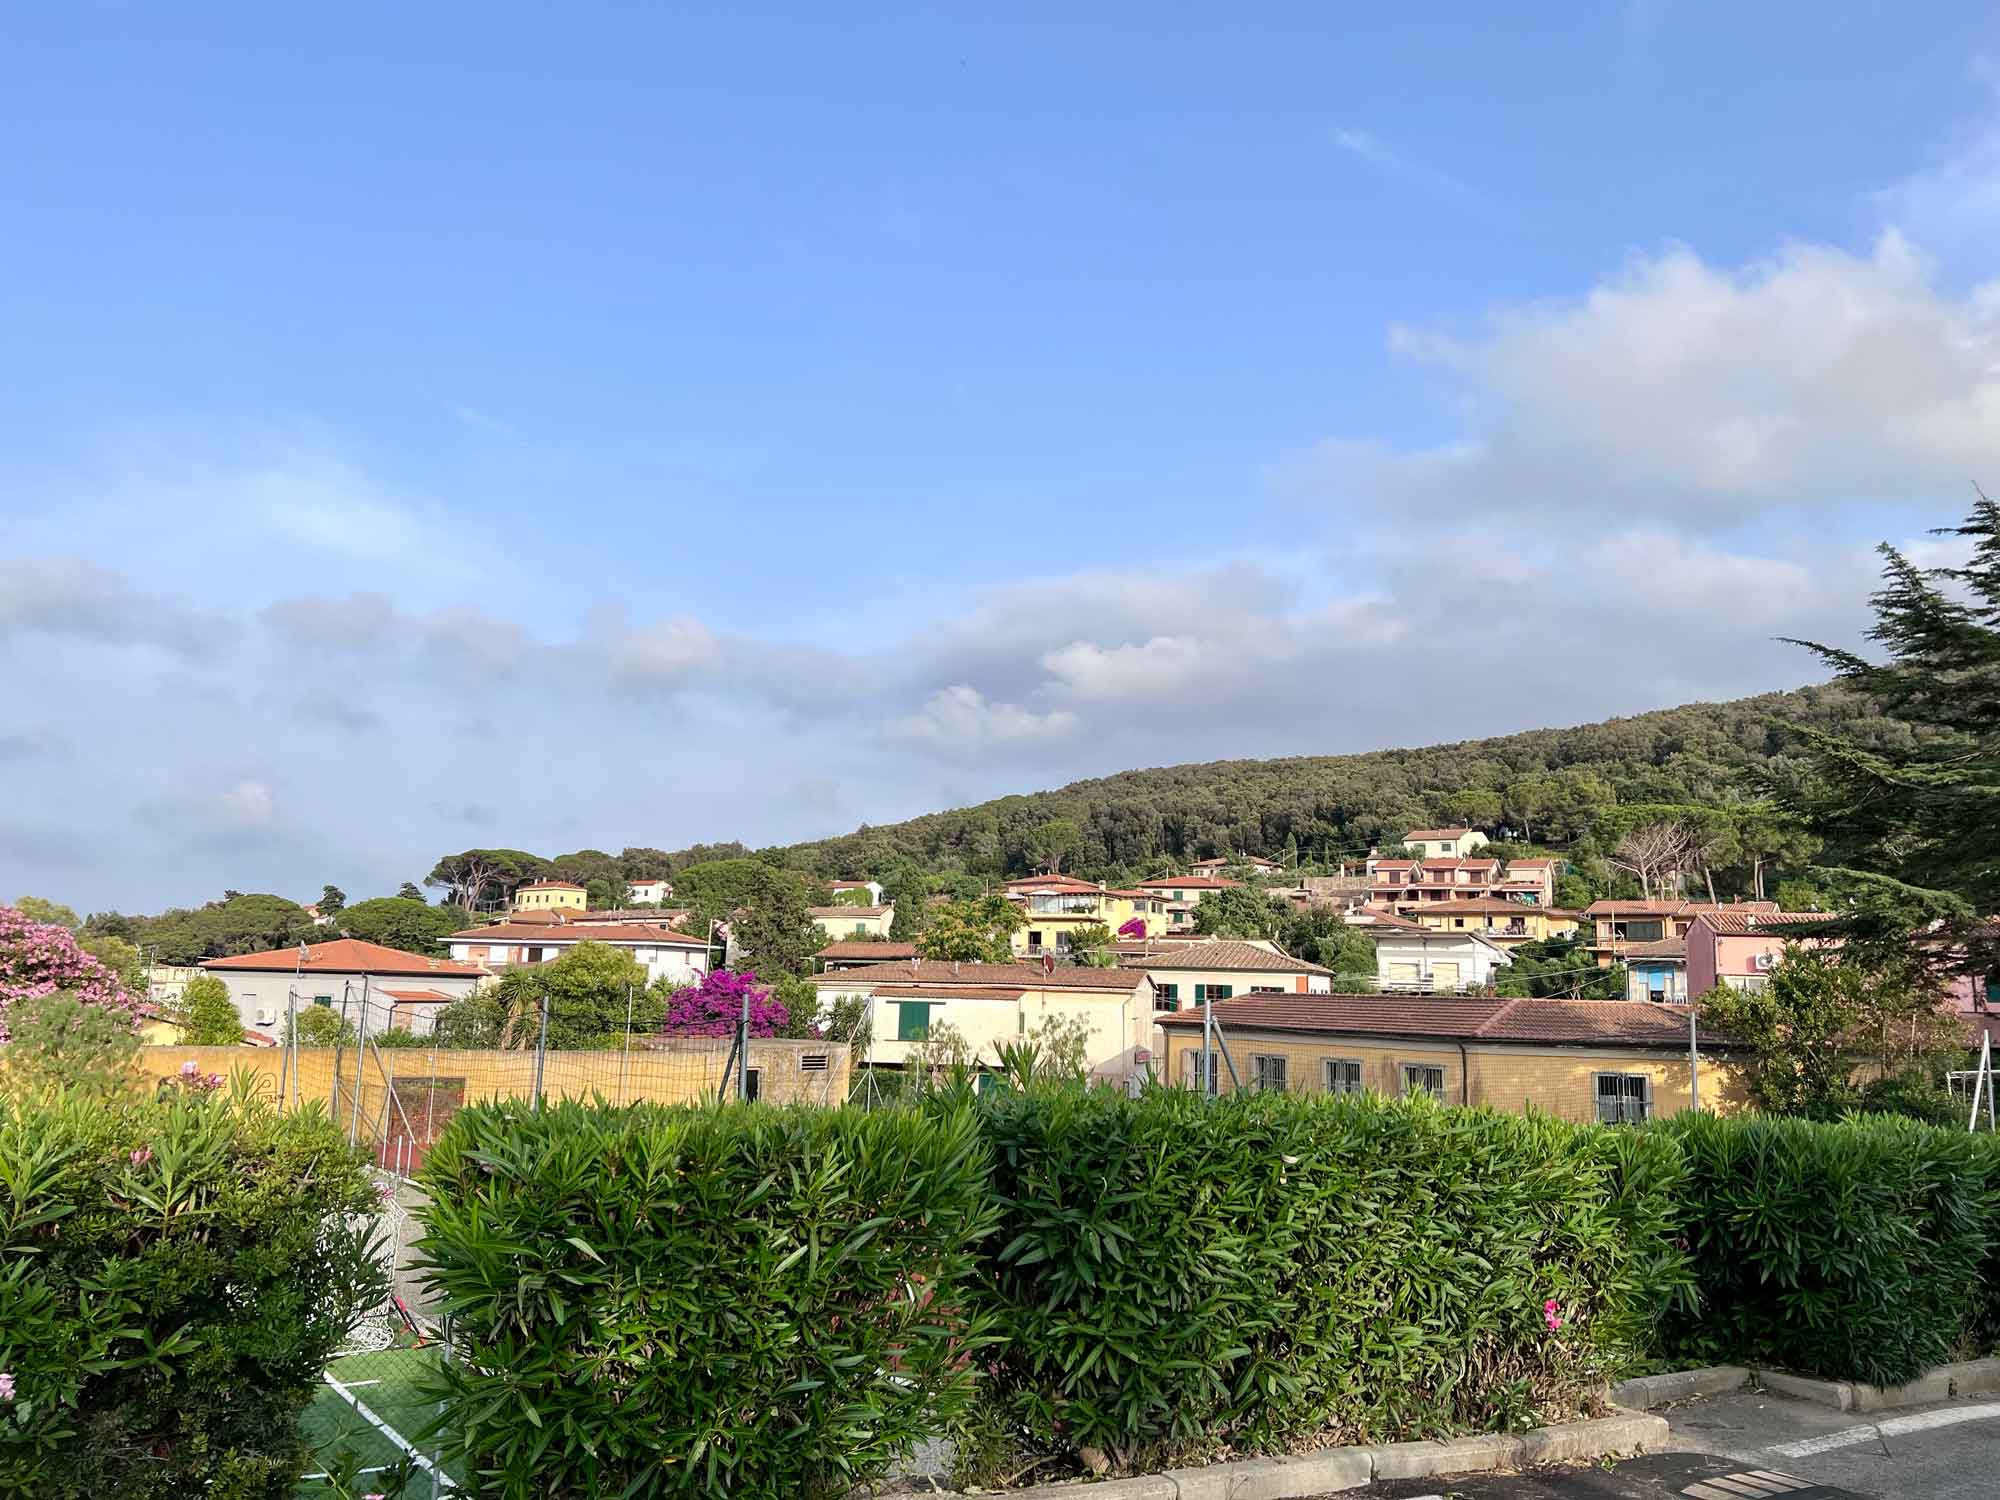 view of Cavo homes on the hillside